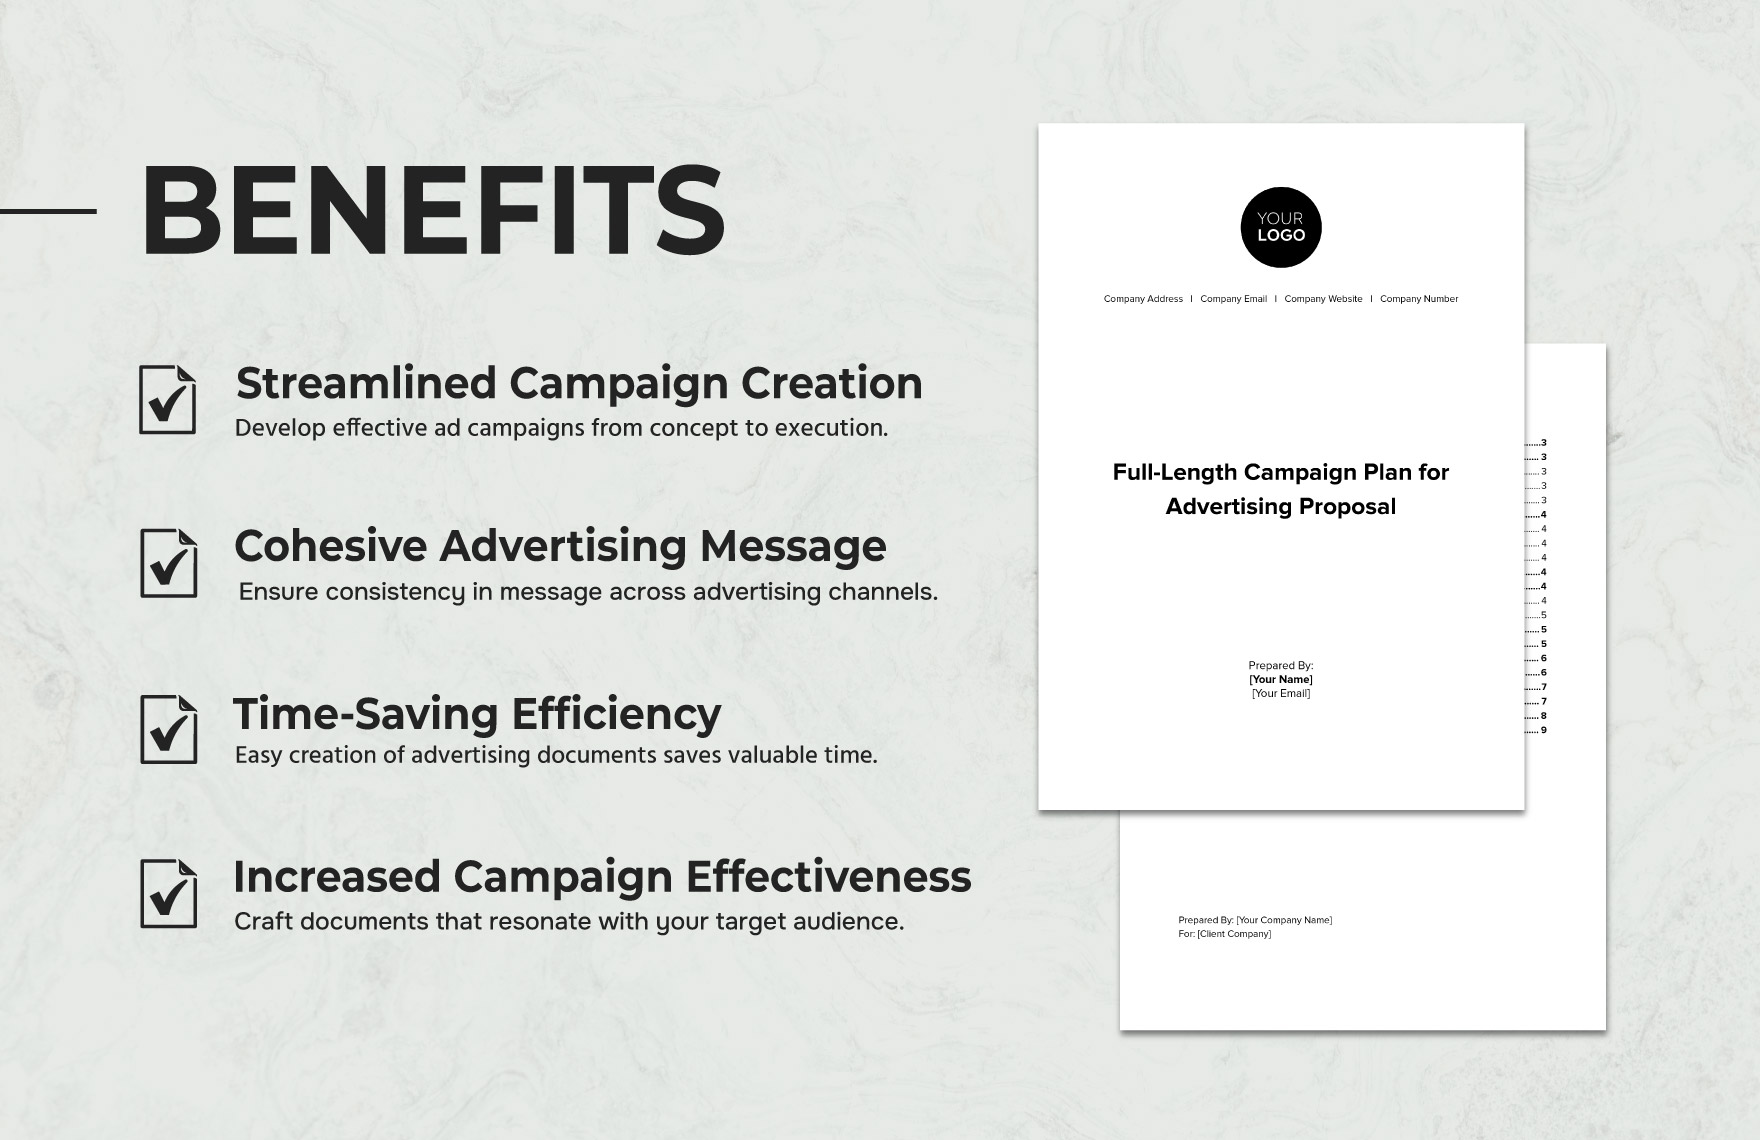 FullLength Campaign Plan for Advertising Proposal Template